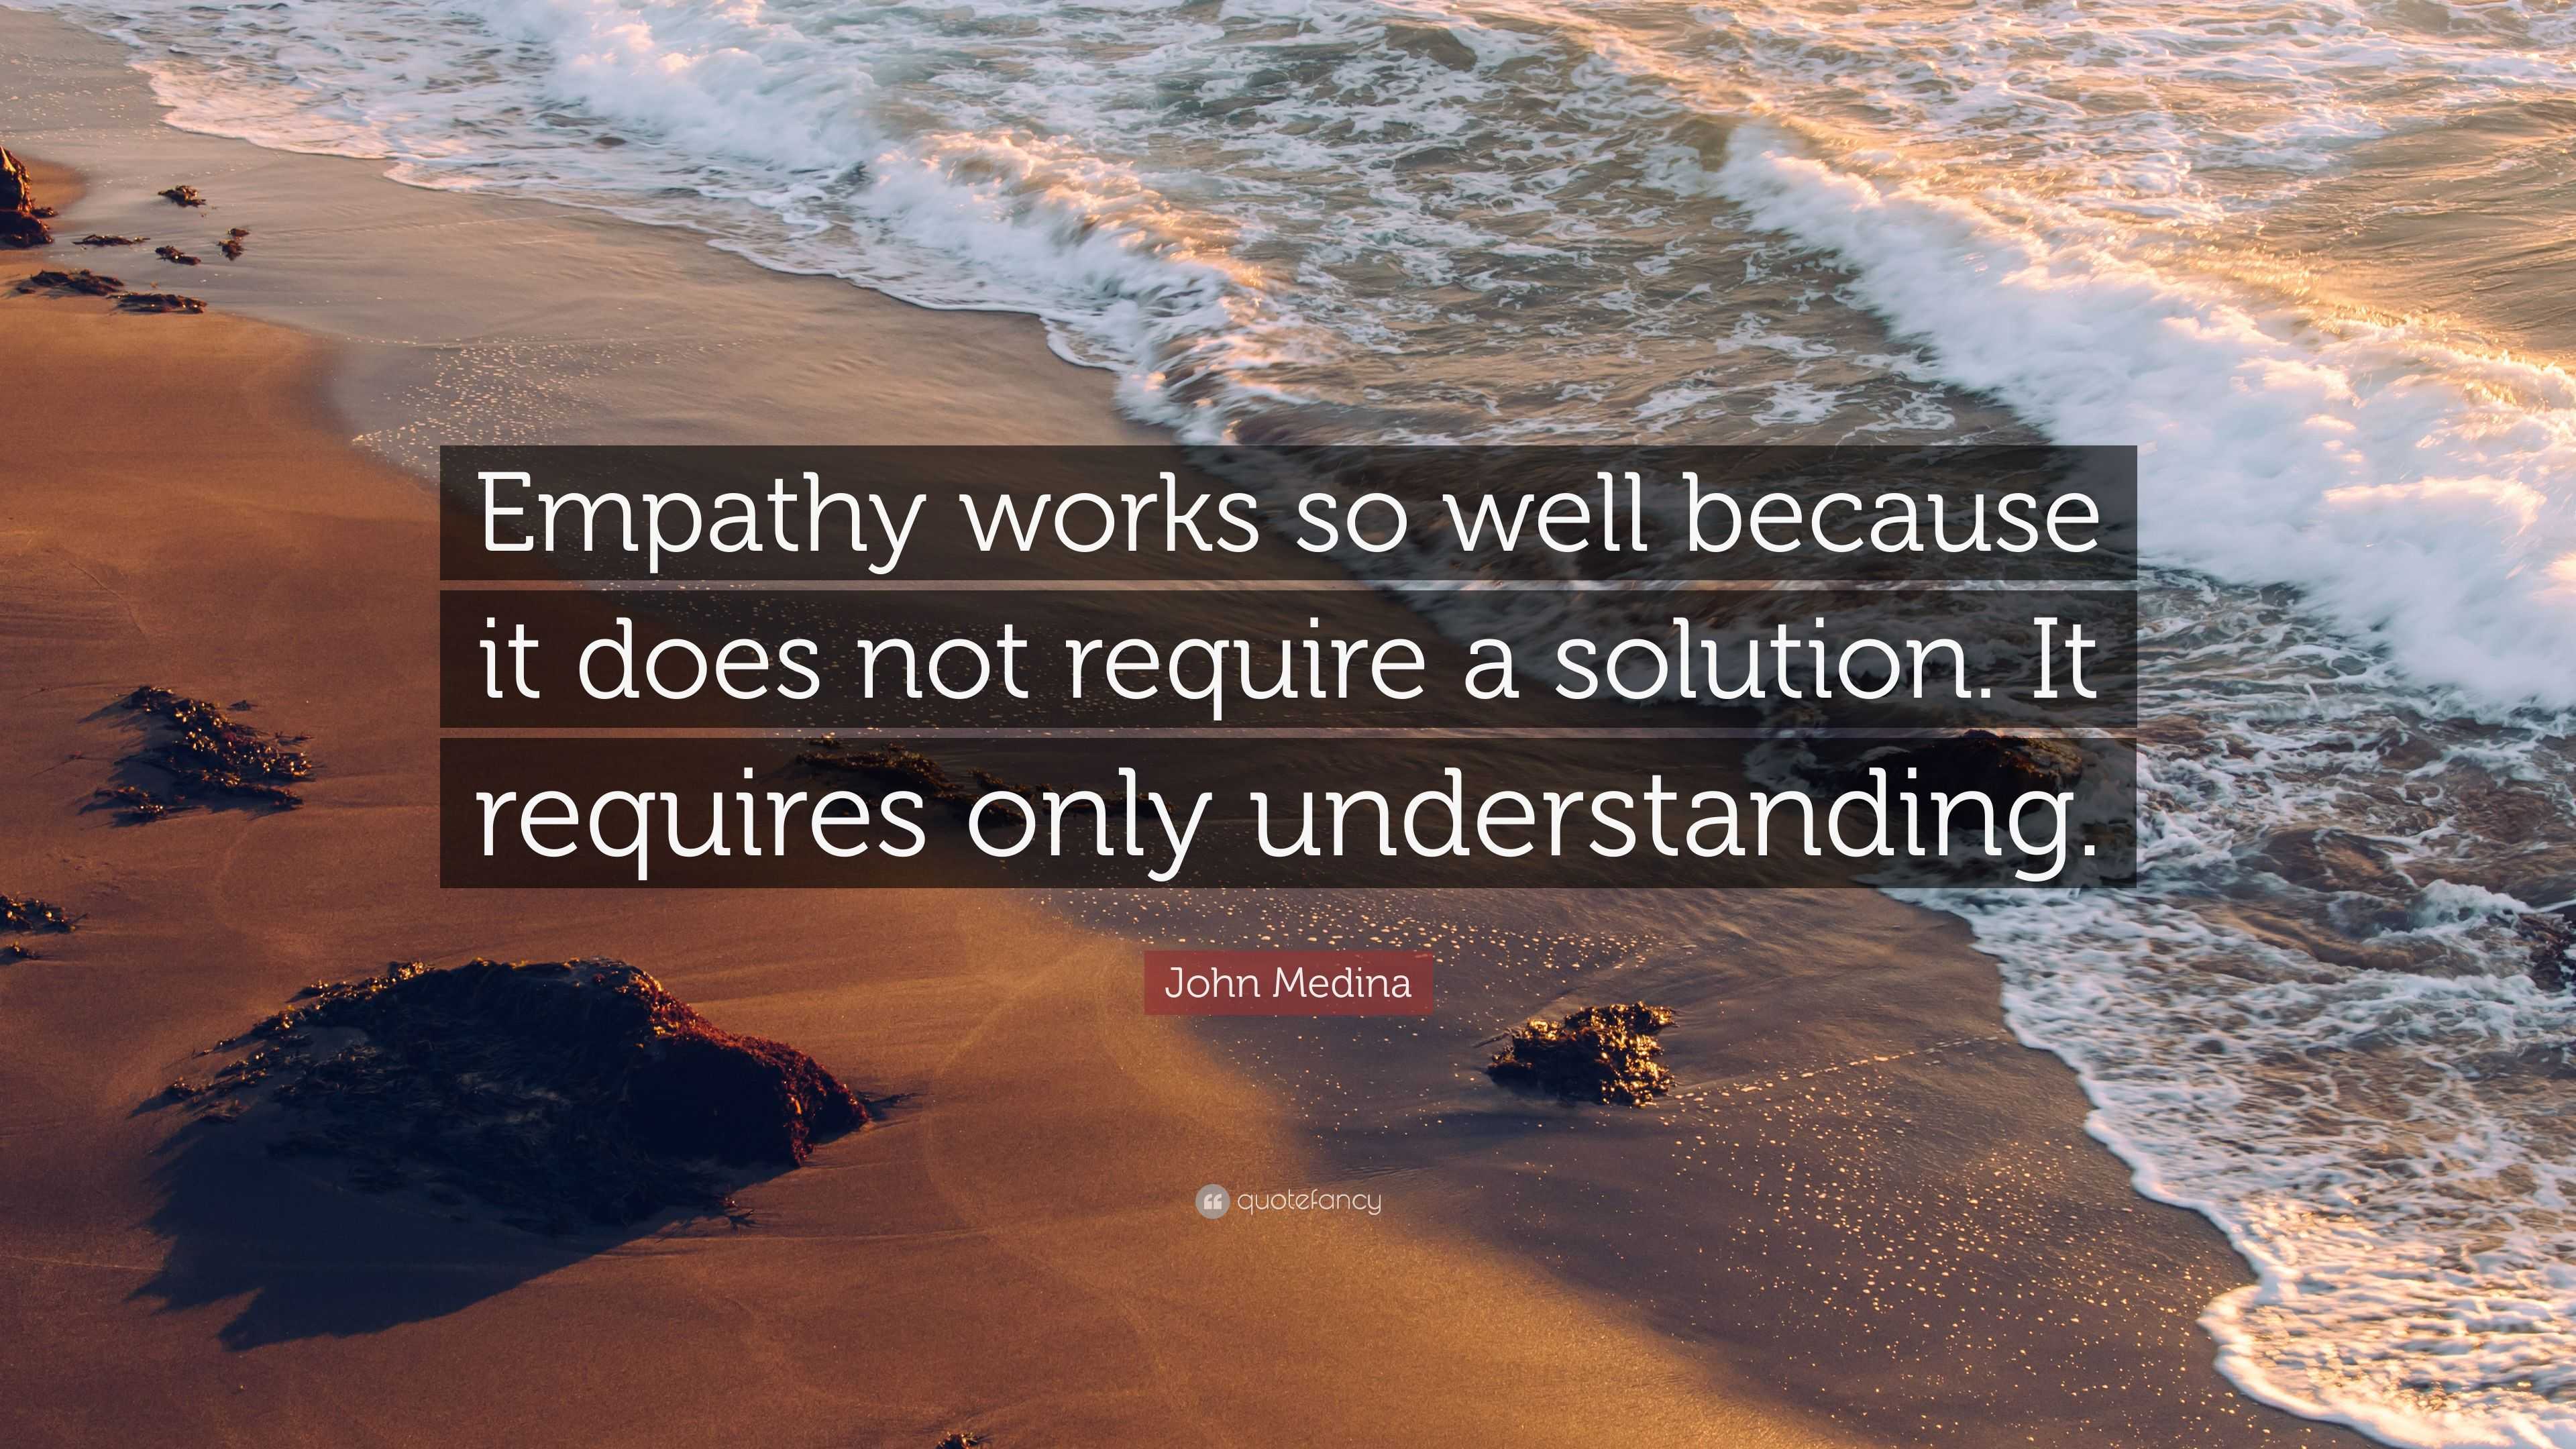 John Medina Quote: “Empathy works so well because it does not require a